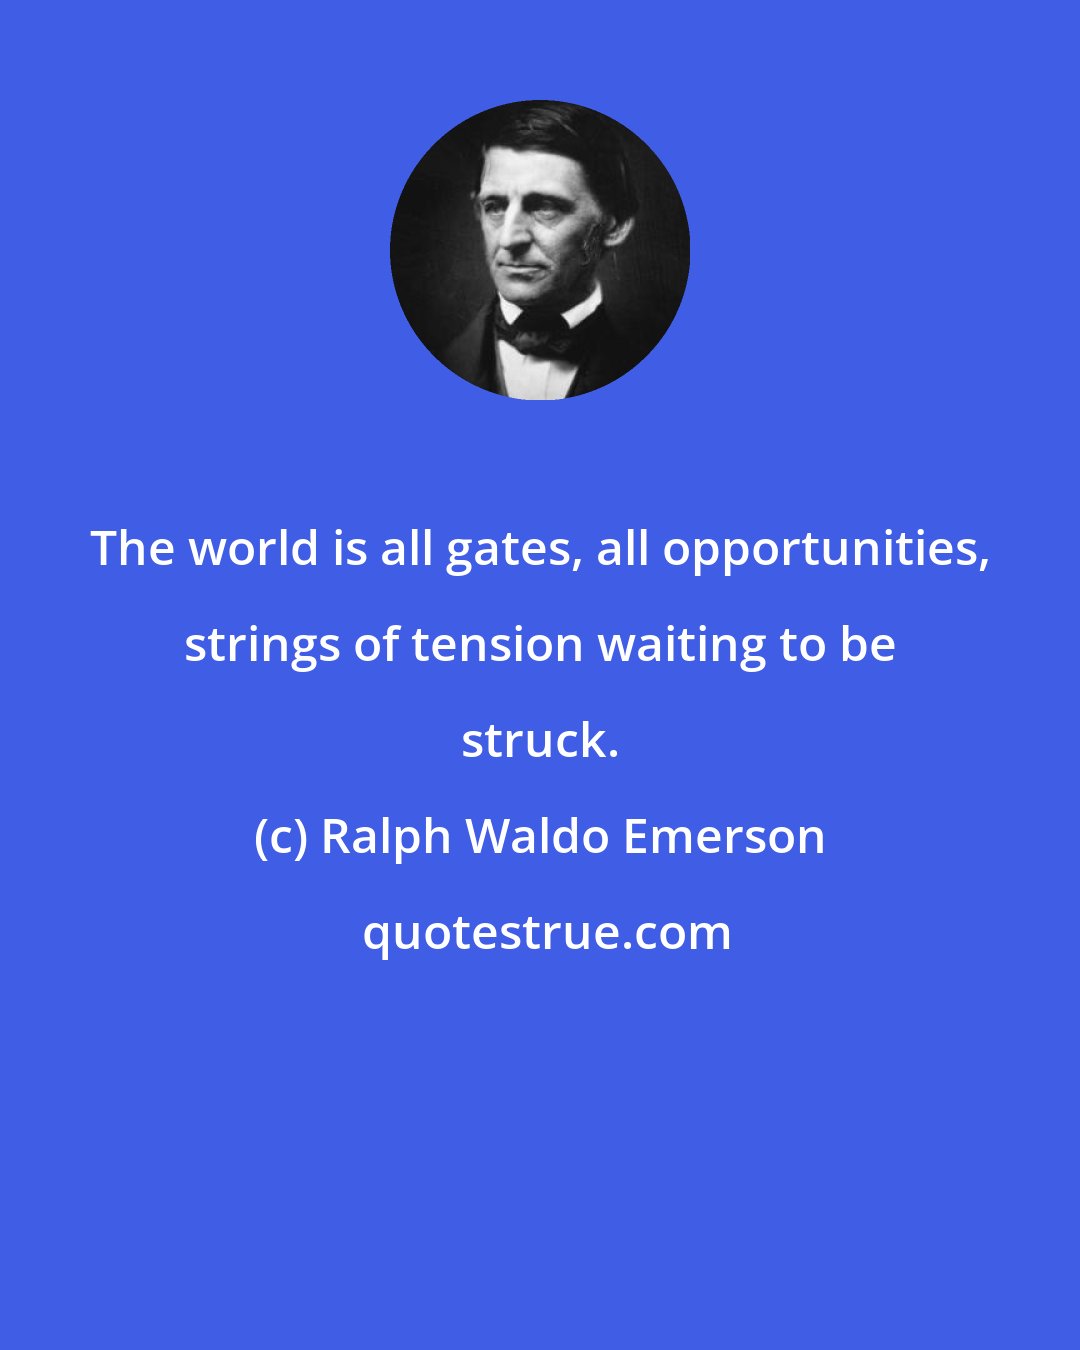 Ralph Waldo Emerson: The world is all gates, all opportunities, strings of tension waiting to be struck.